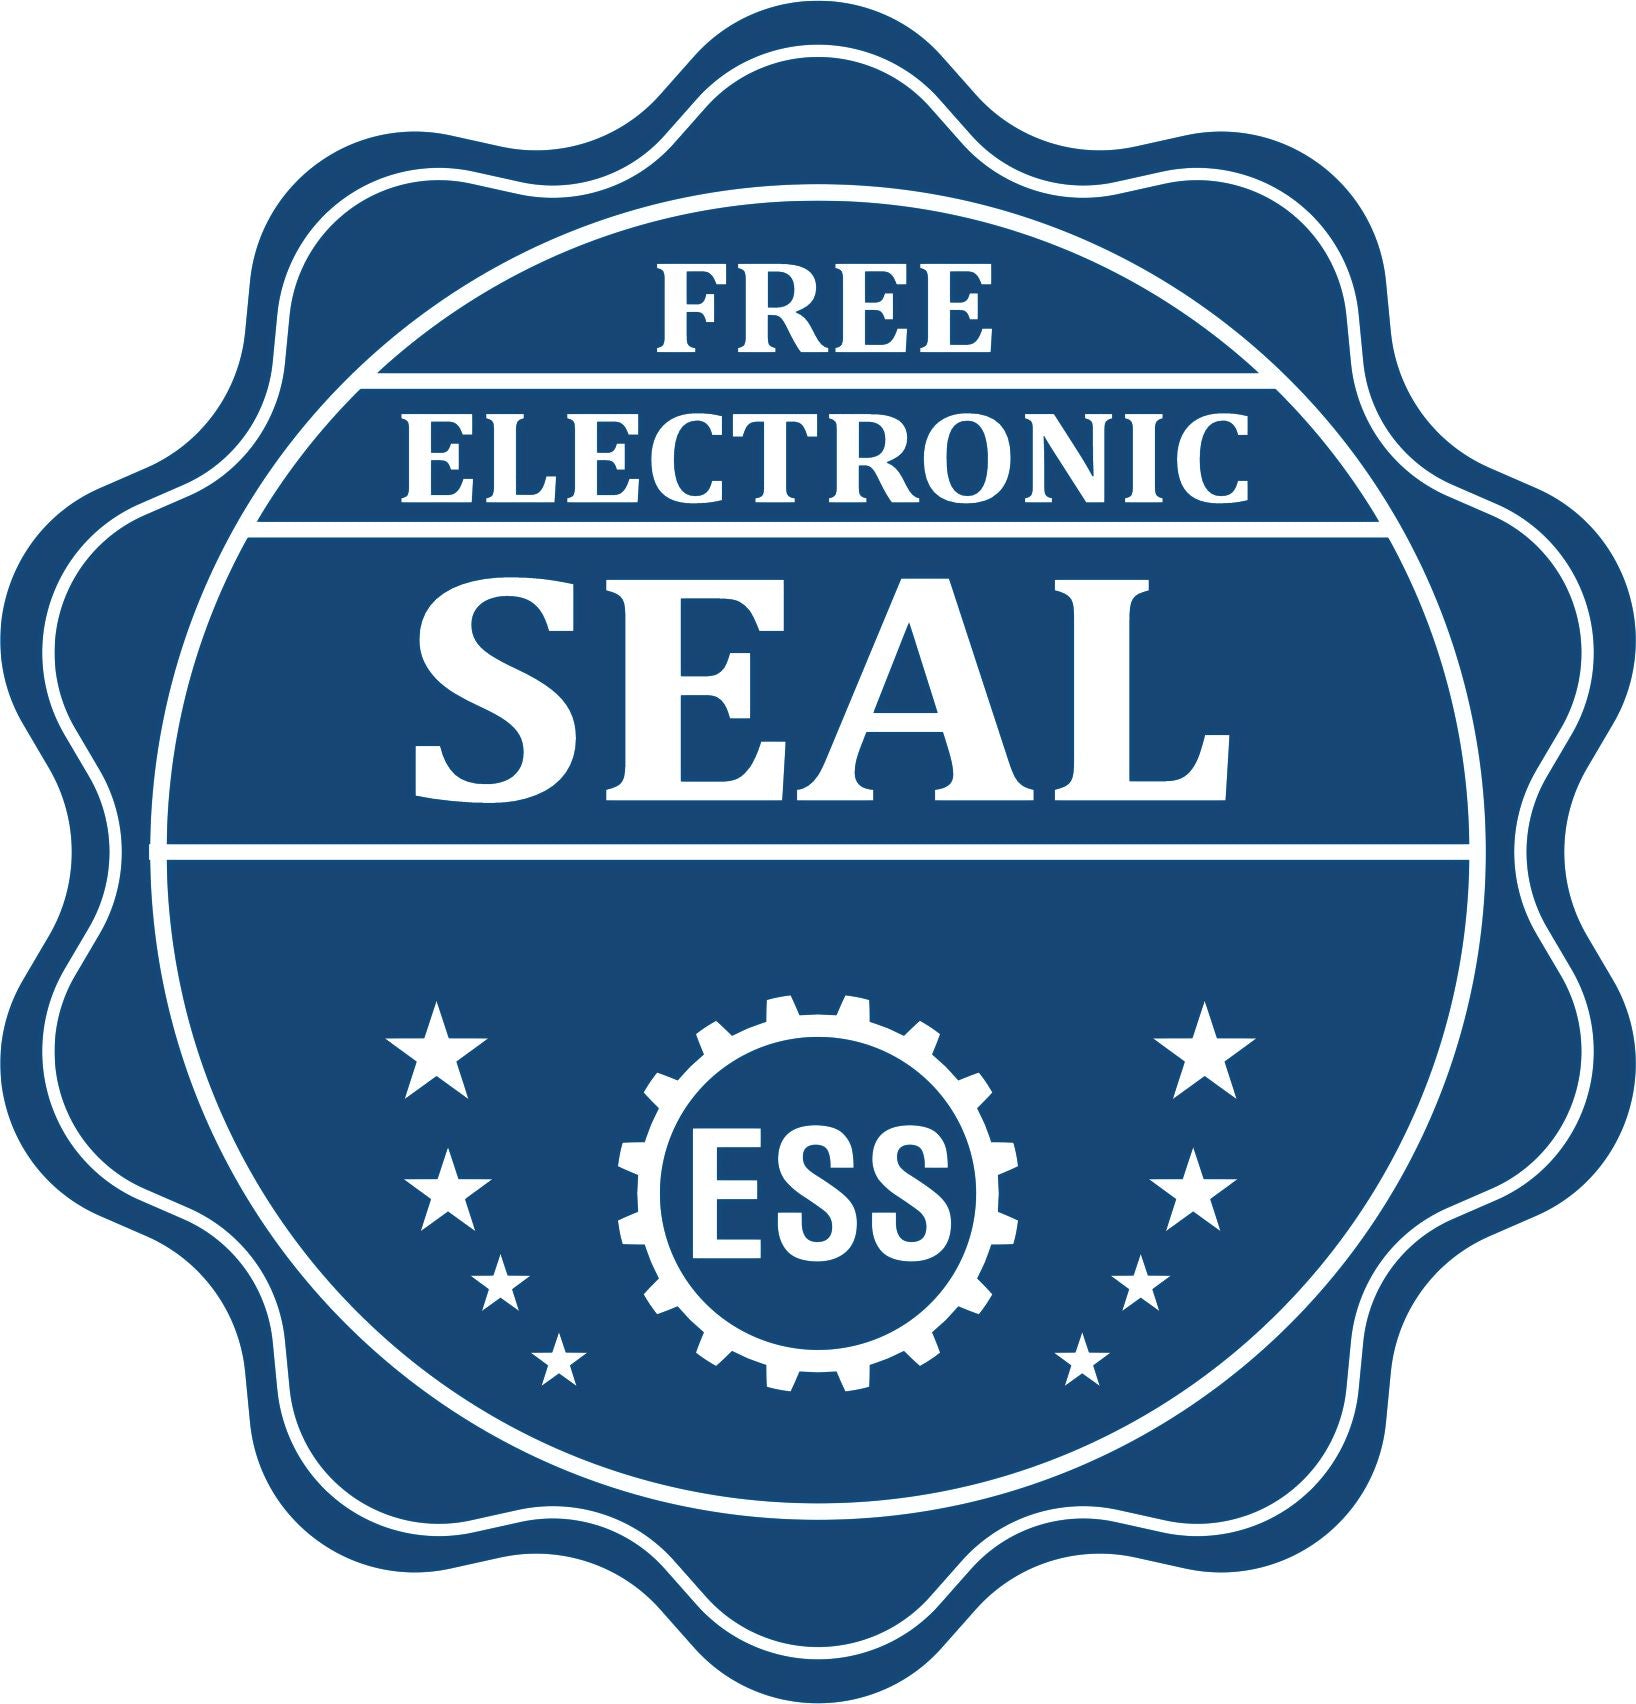 A badge showing a free electronic seal for the State of New Jersey Soft Land Surveyor Embossing Seal with stars and the ESS gear on the emblem.